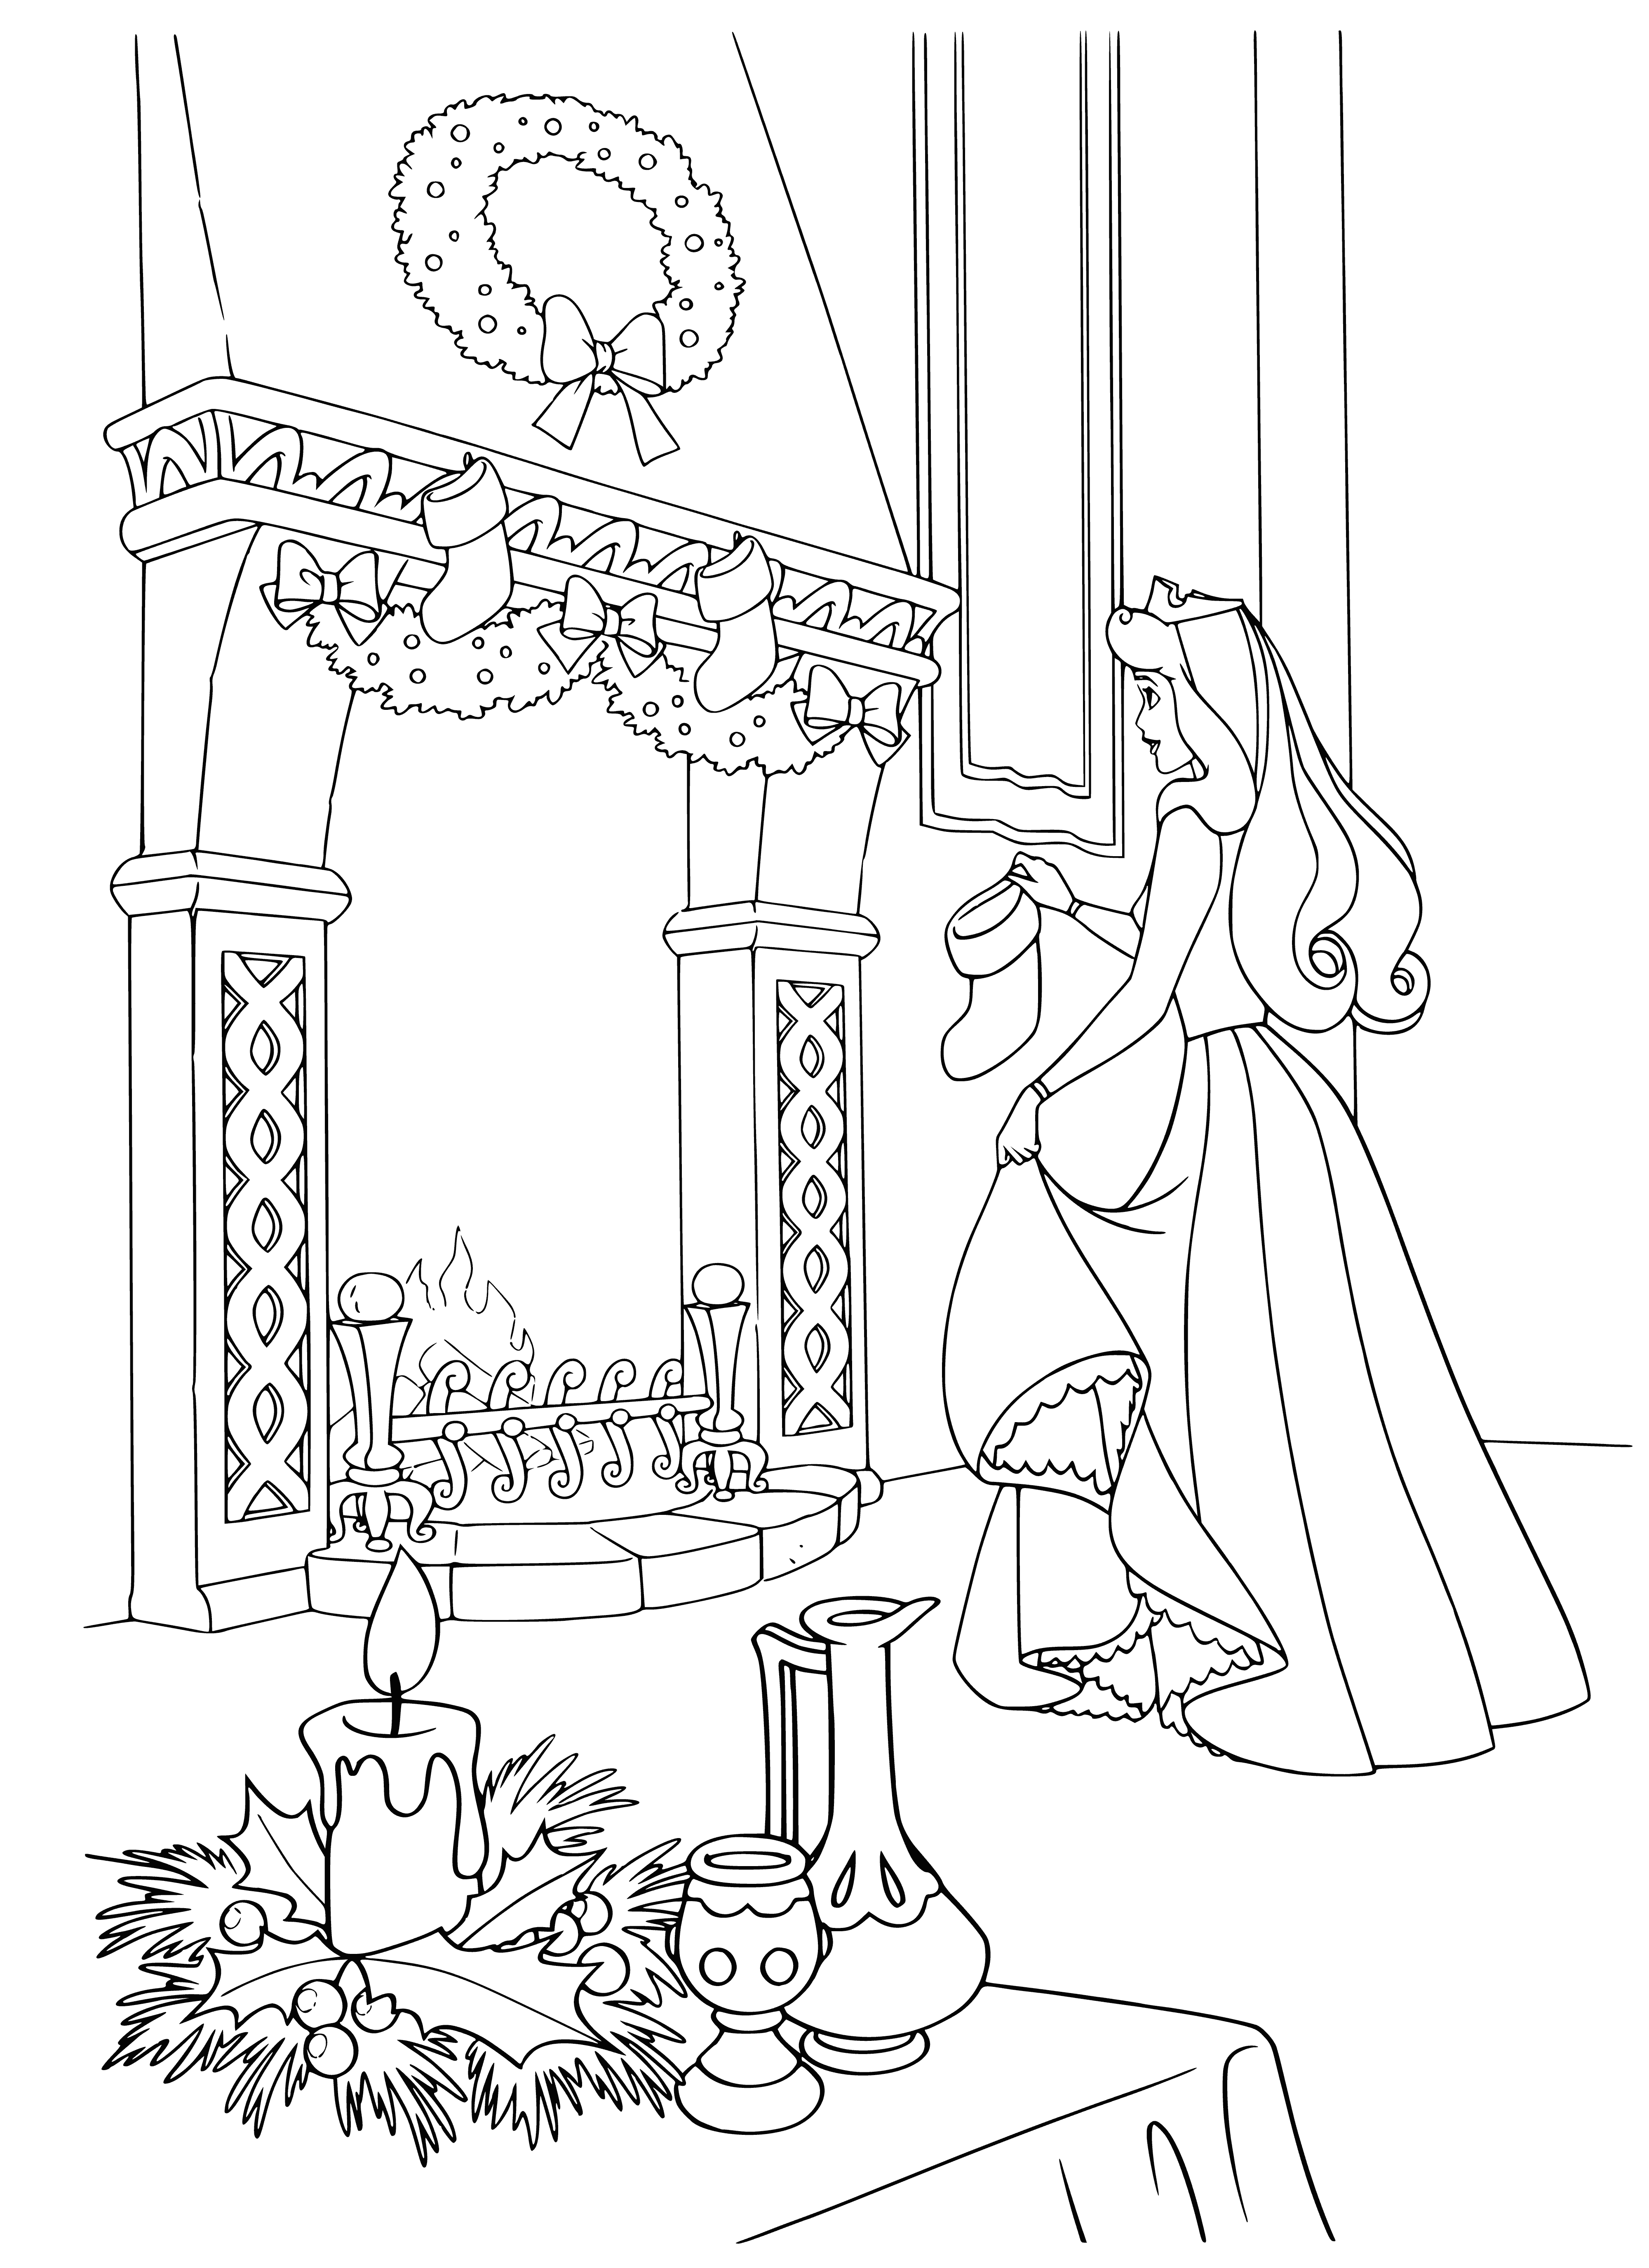 coloring page: Disney princesses celebrate the New Year with Aurora decorating the fireplace with streamers & a garland. Snow White, Belle & Cinderella help.